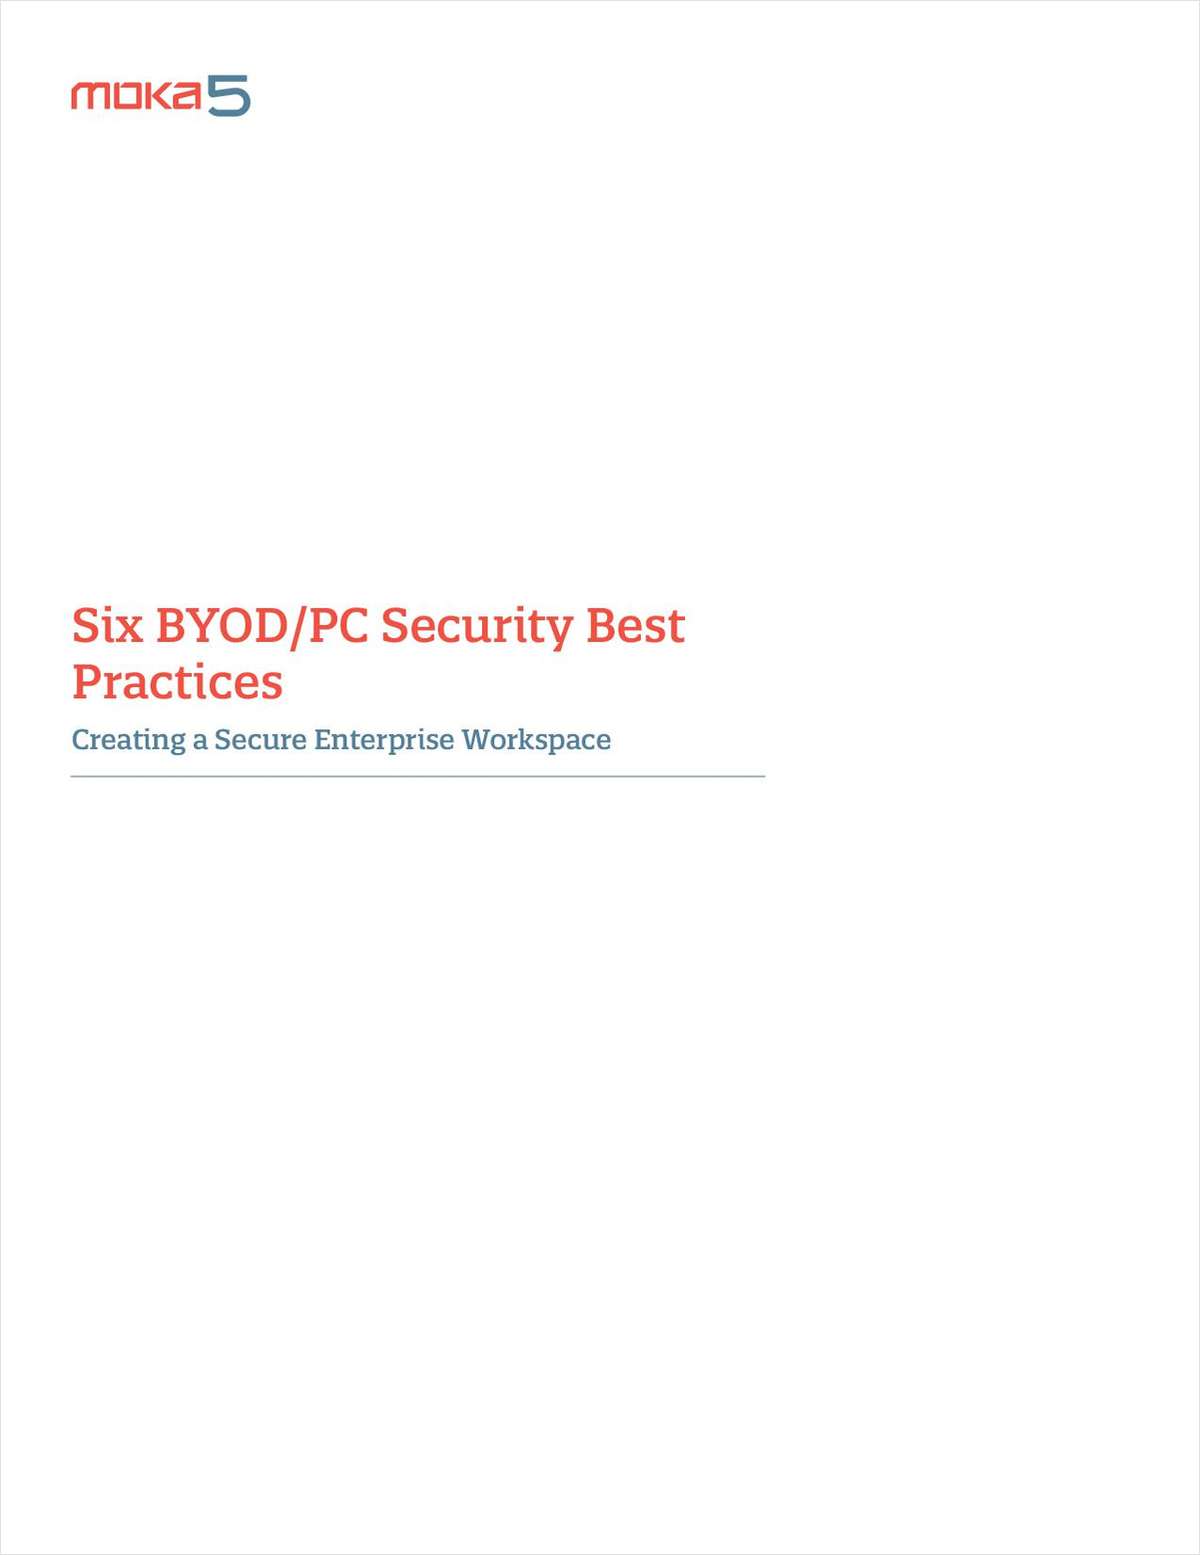 Six BYOD/PC Security Best Practices